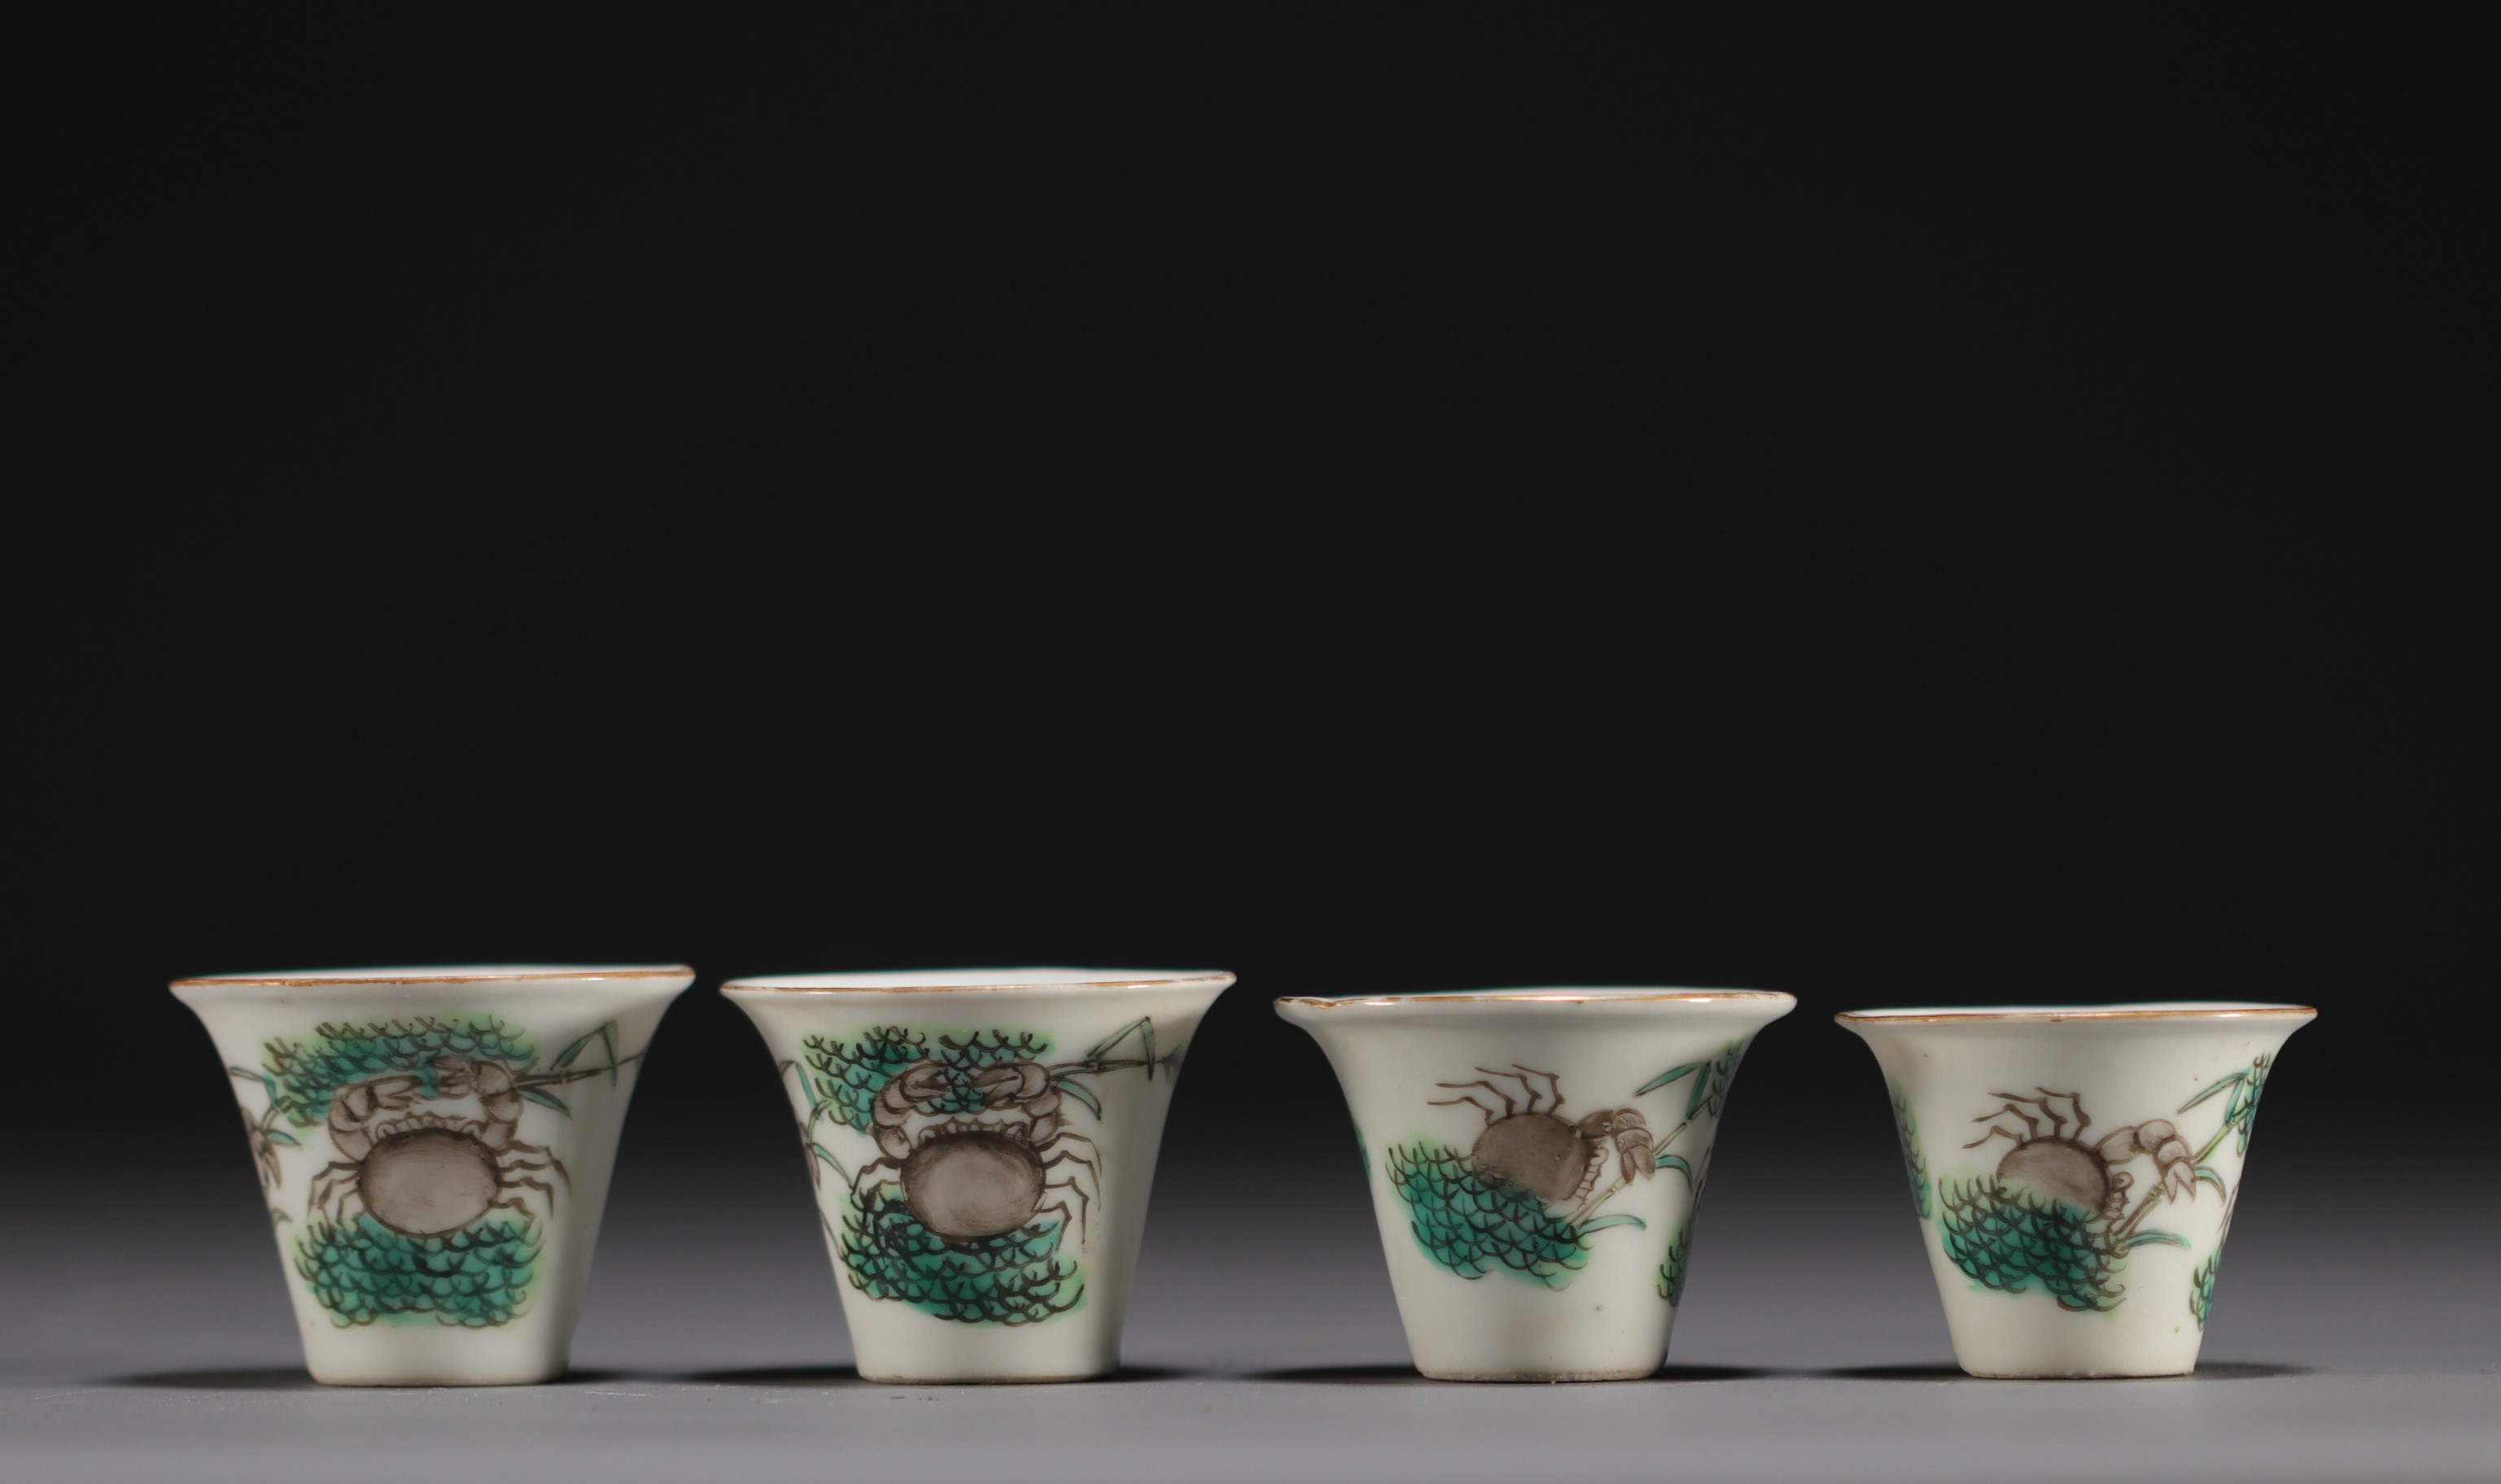 China - Set of eleven bowls of different sizes in famille rose porcelain, 19th century. - Image 3 of 8